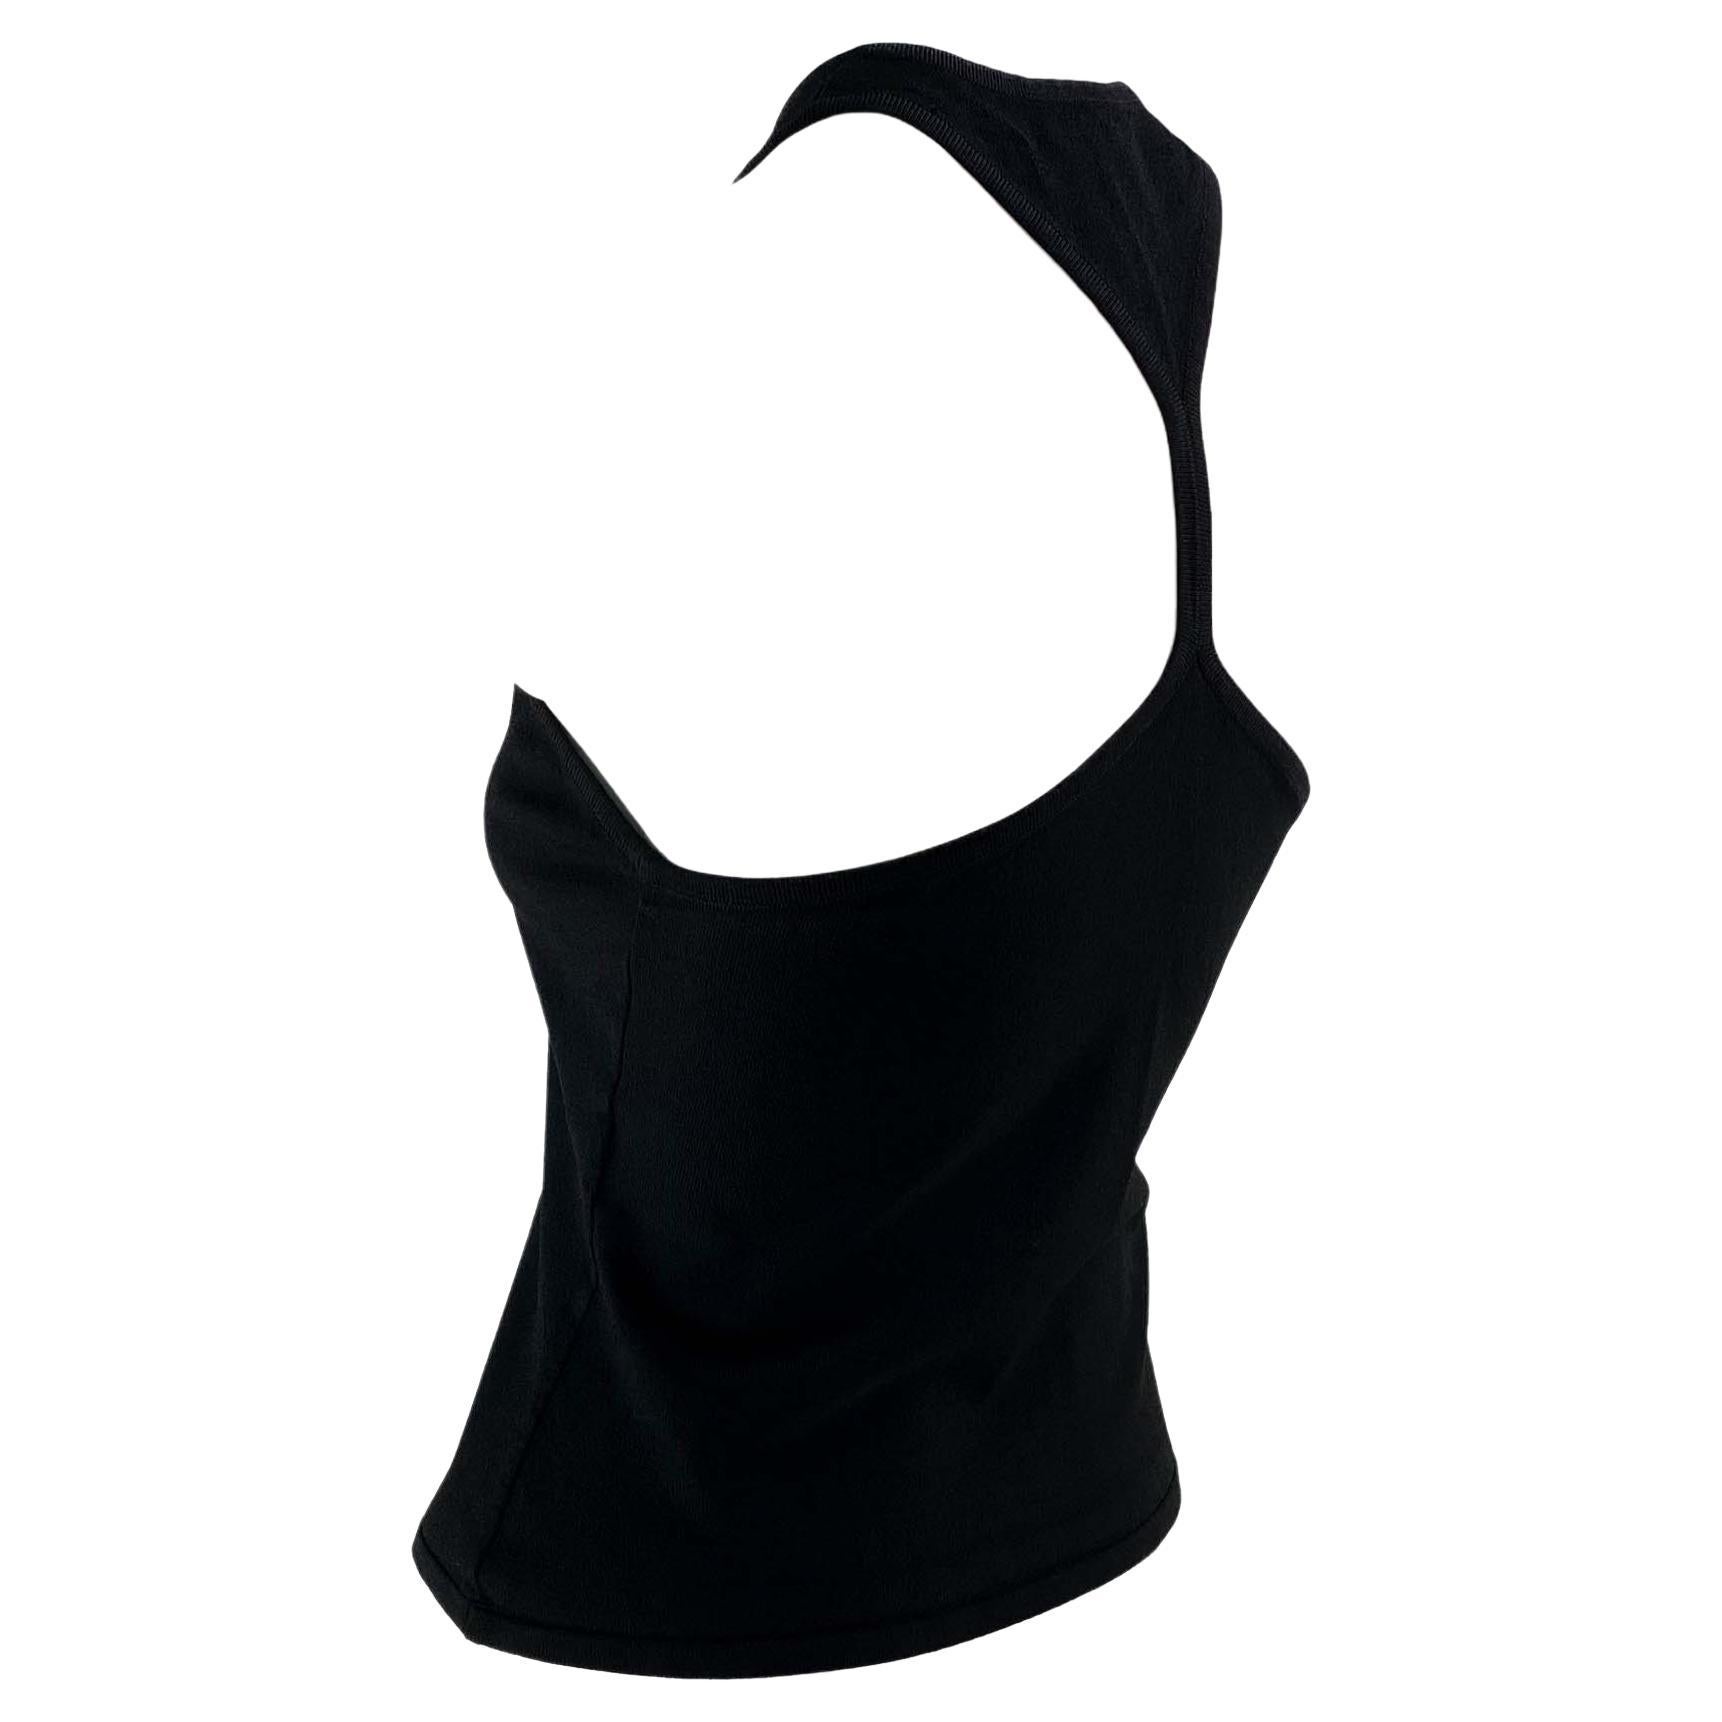 S/S 1998 Gucci by Tom Ford Black Stretch Knit Racerback Tank  In Good Condition For Sale In West Hollywood, CA